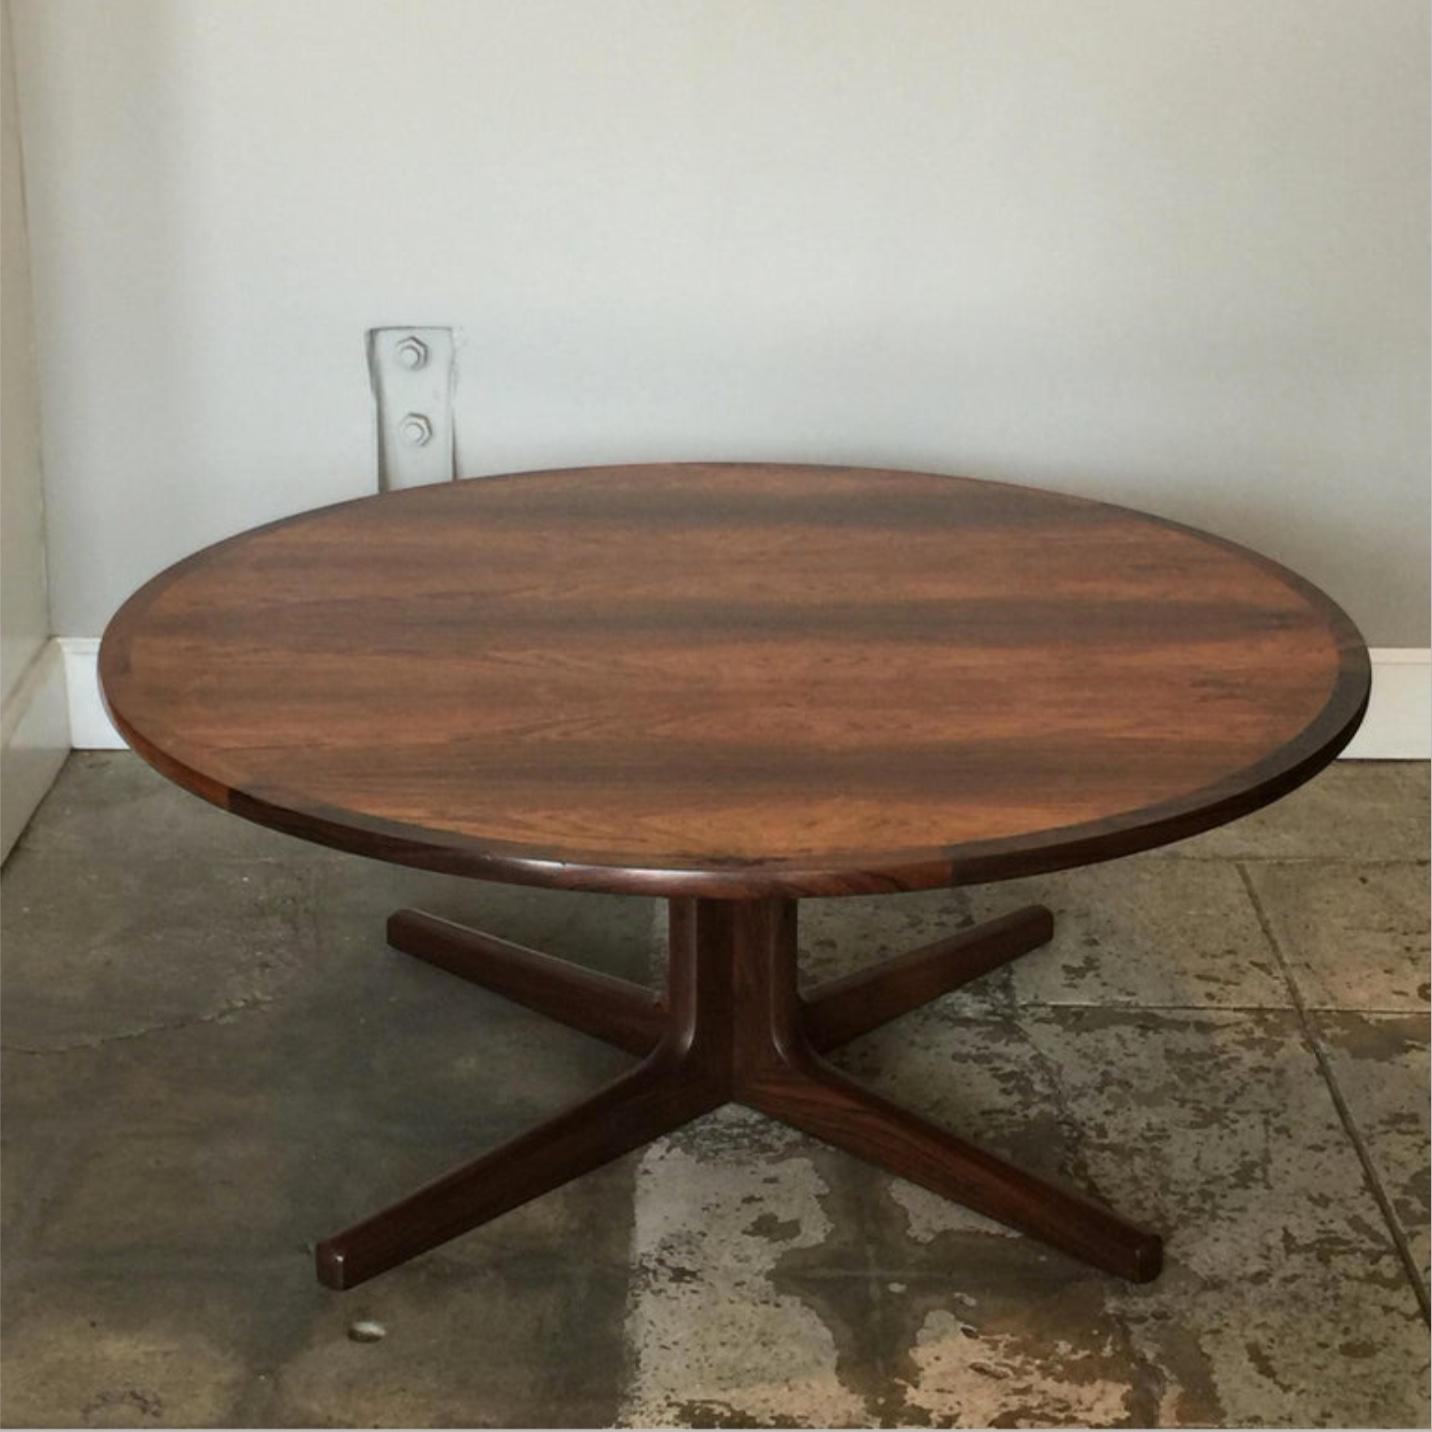 Impeccable Hans C. Andersen Danish rosewood round coffee table.

Stamped: MADE IN DENMARK - HANS C. ANDERSEN.

Rare with such a beautiful wood.

Large, round coffee tables are the best.